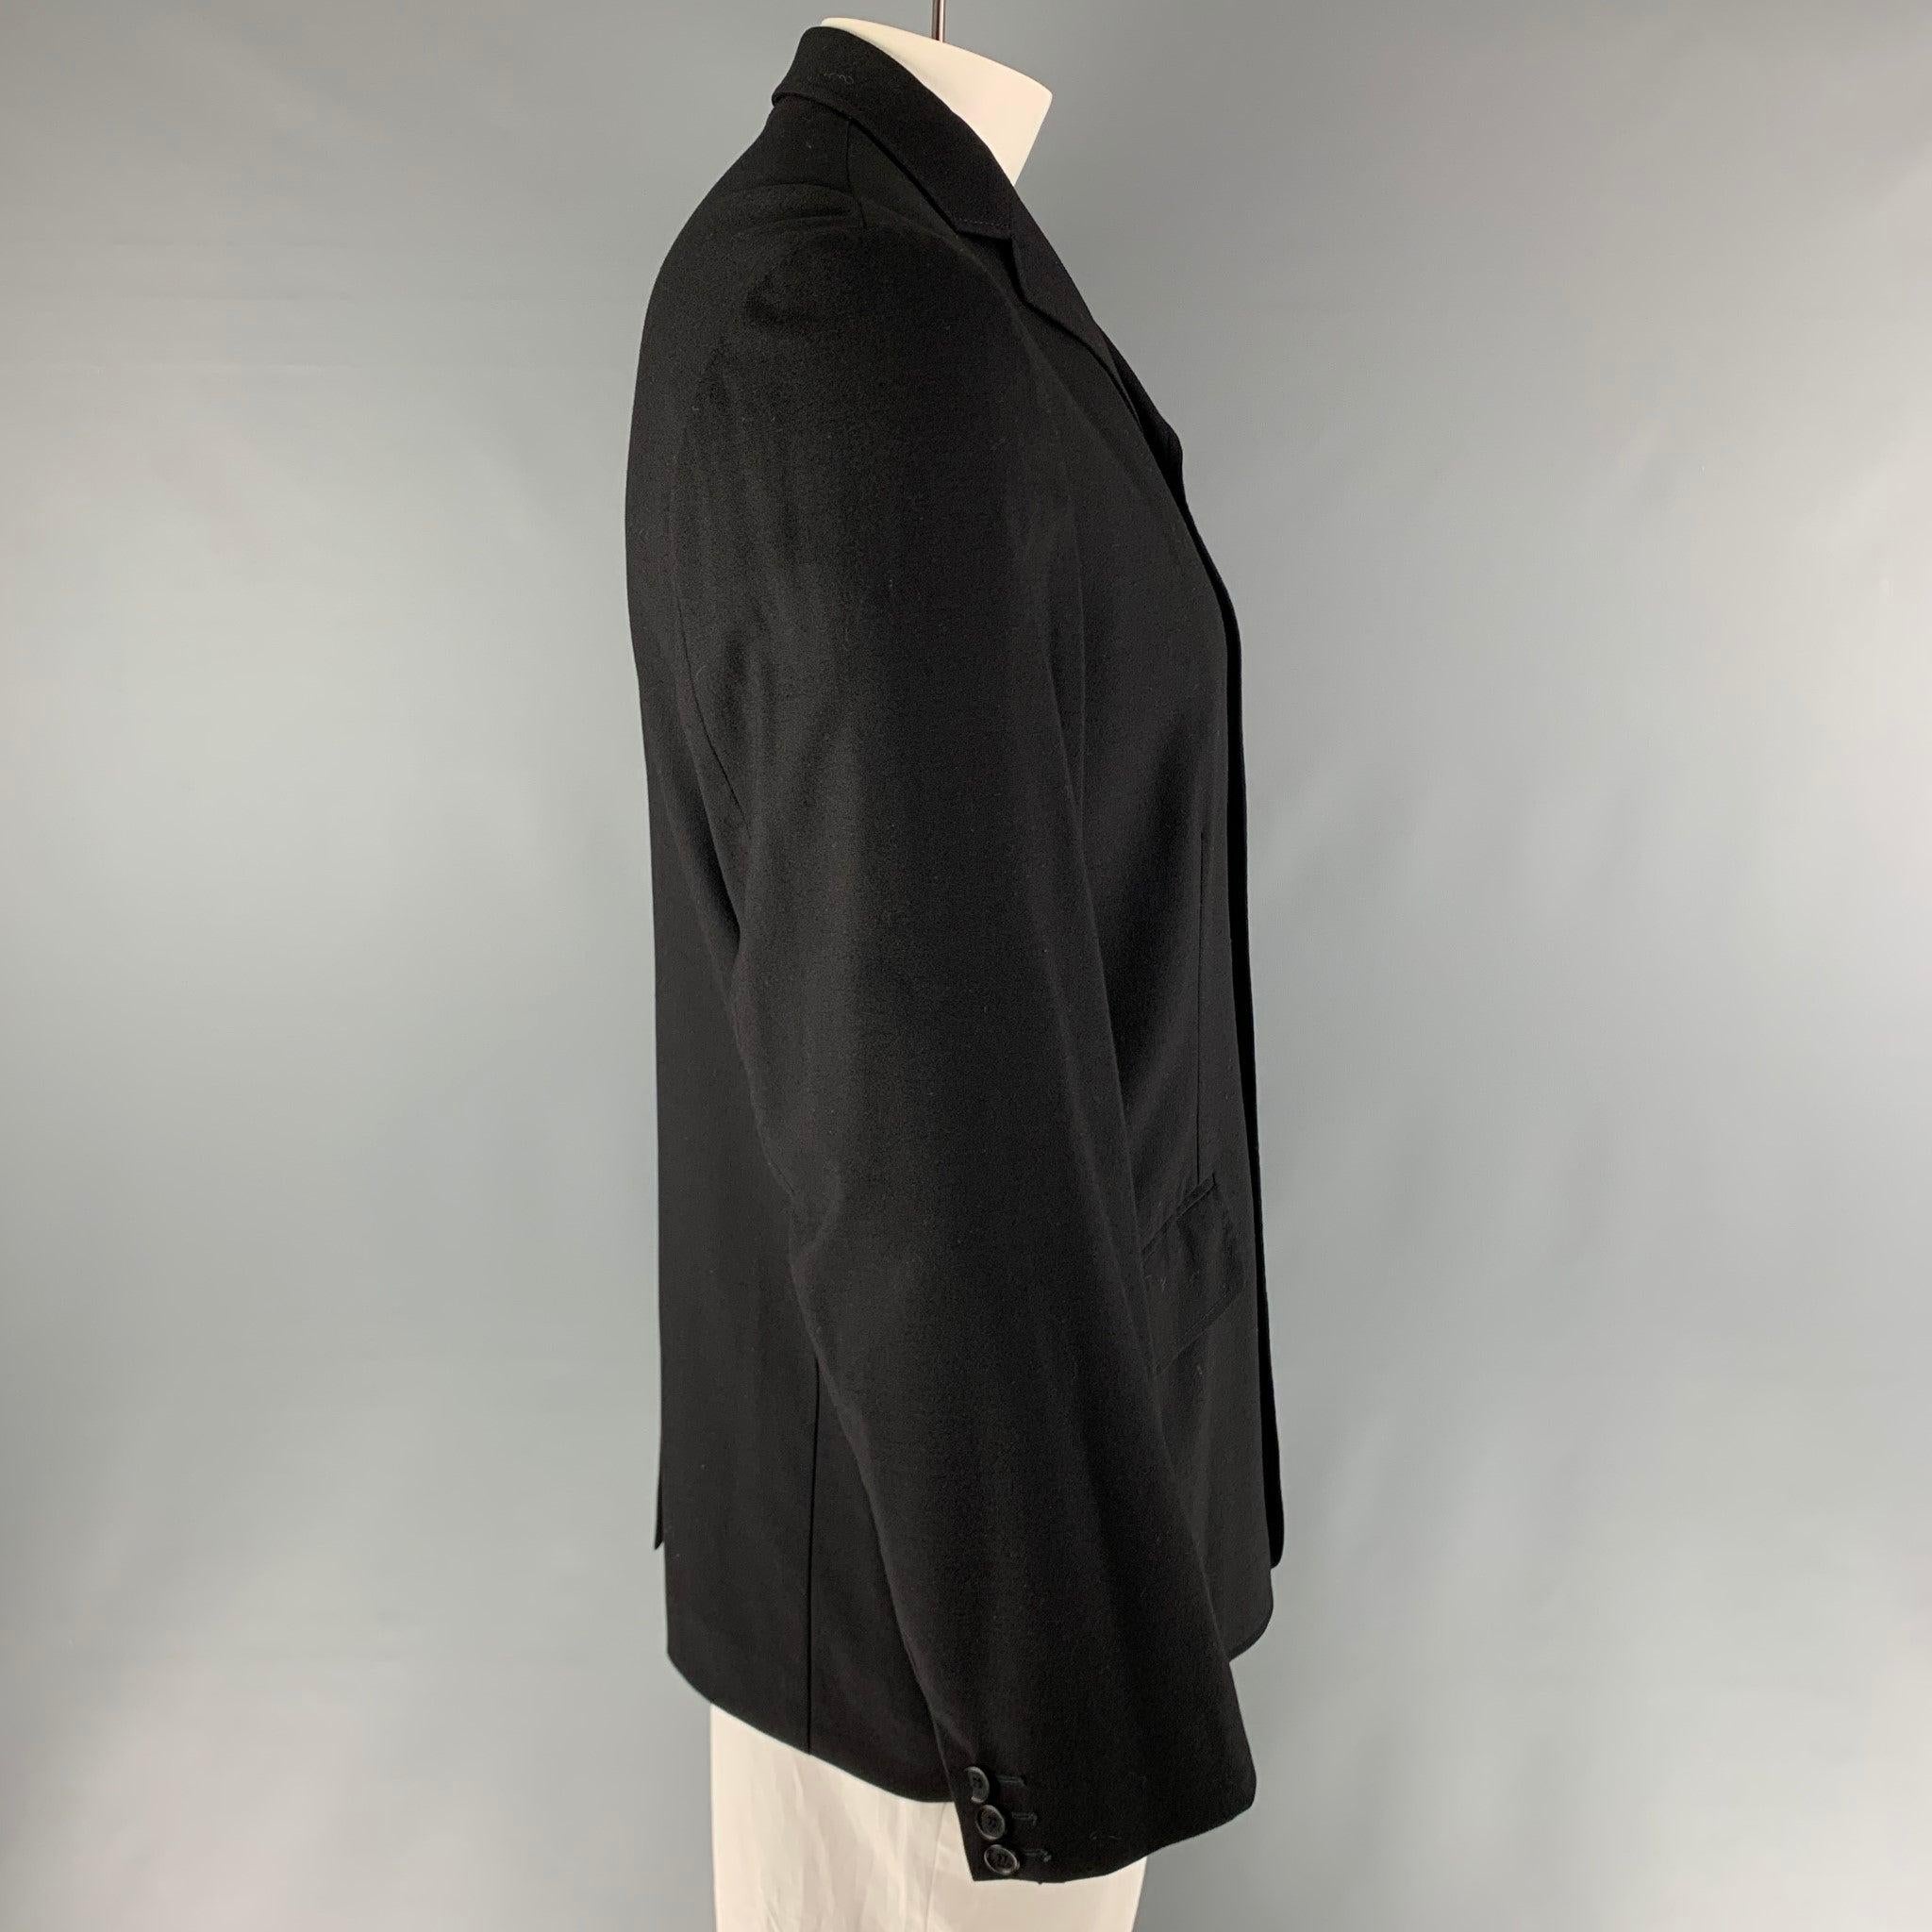 DOLCE & GABBANA black sport coat comes in a cashmere & lycra blend featuring a single breasted cut, flap pockets, and a notch lapel. Made in Italy.
Excellent Pre-Owned Condition. 

Marked:   40 

Measurements: 
 
Shoulder: 19 inches Chest: 45 inches